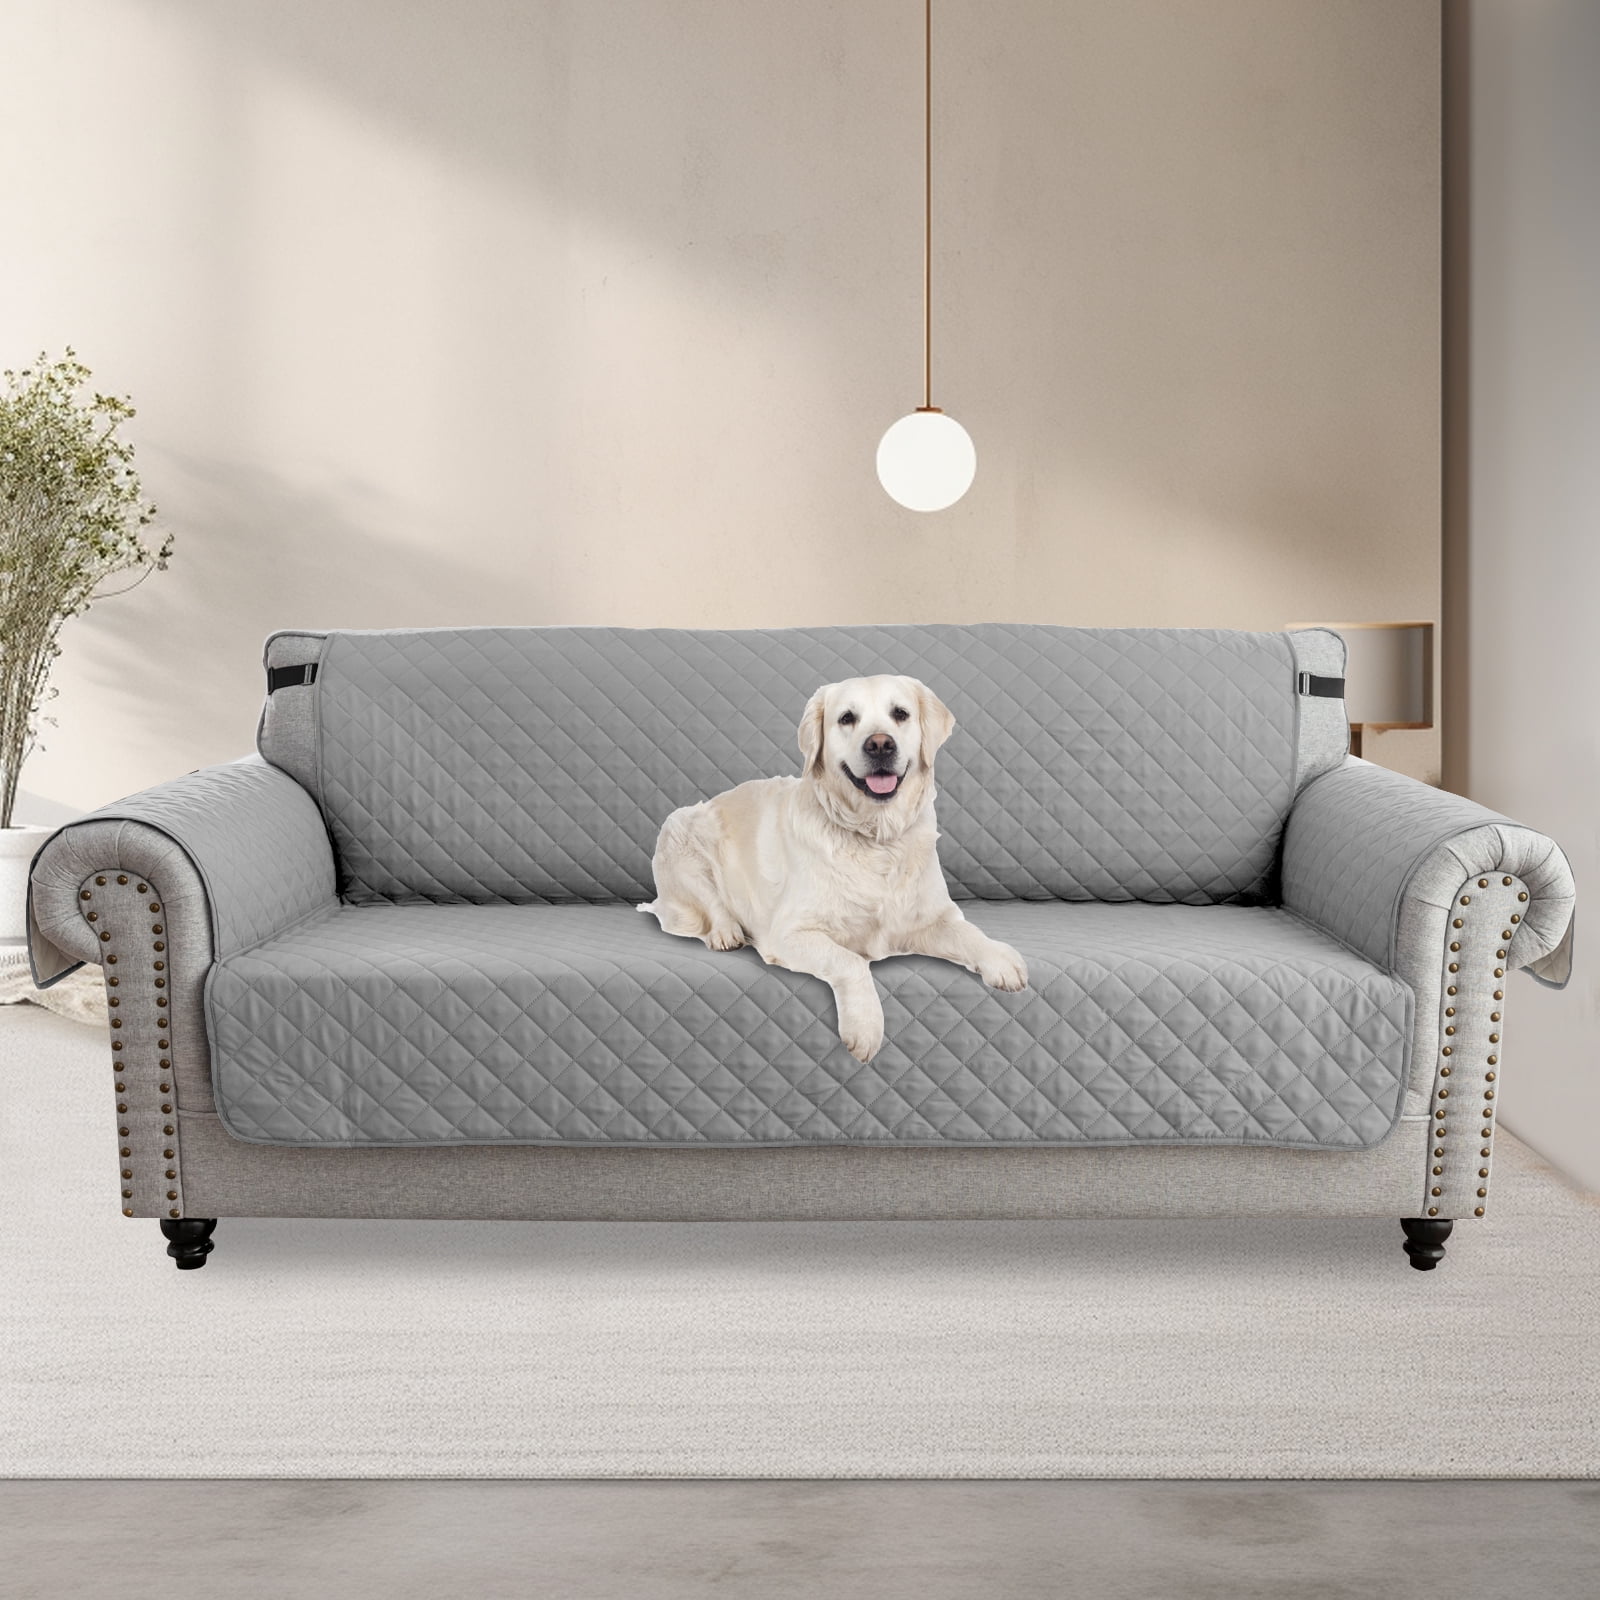 LIANGLAOI Faux Pu Leather Sofa Cover,174% Waterproof Non-Slip Sectional  Couch Cover,Solid Color Sofa Slipcover for Dogs,Children,Pets Furniture